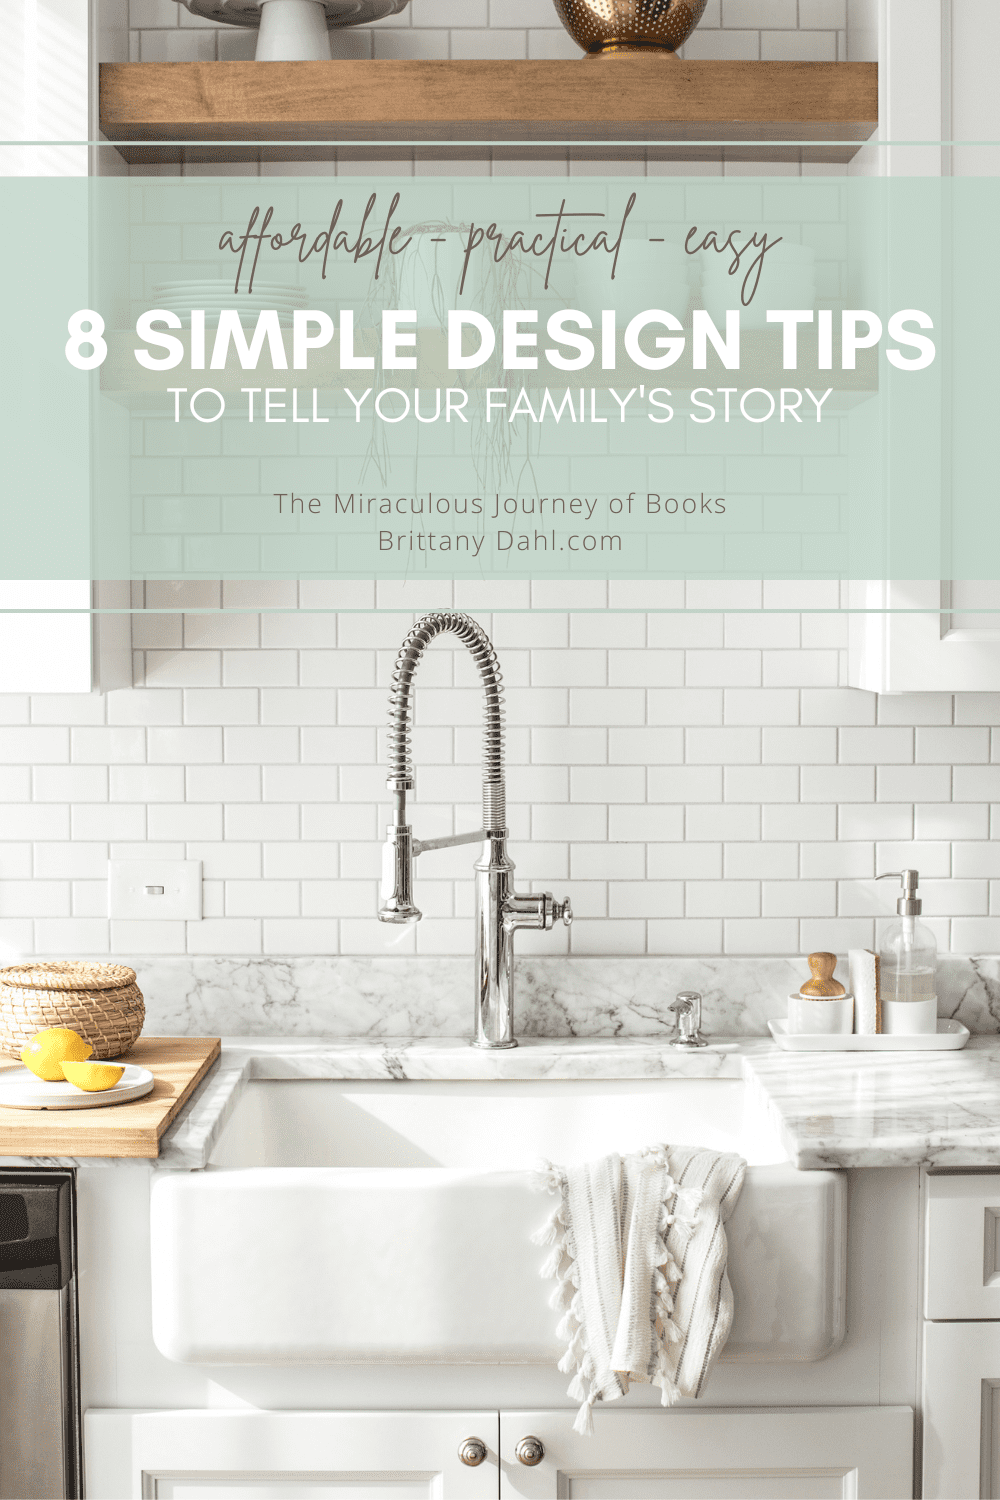 Affordable, practical, easy: 8 simple design tips to tell your family's story. The Miraculous Journey of Books at Brittanydahl.com. Image of farmhouse style kitchen sink, white subway tile on wall, white cabinets, wooden shelf, and lemon slices set out on counter.